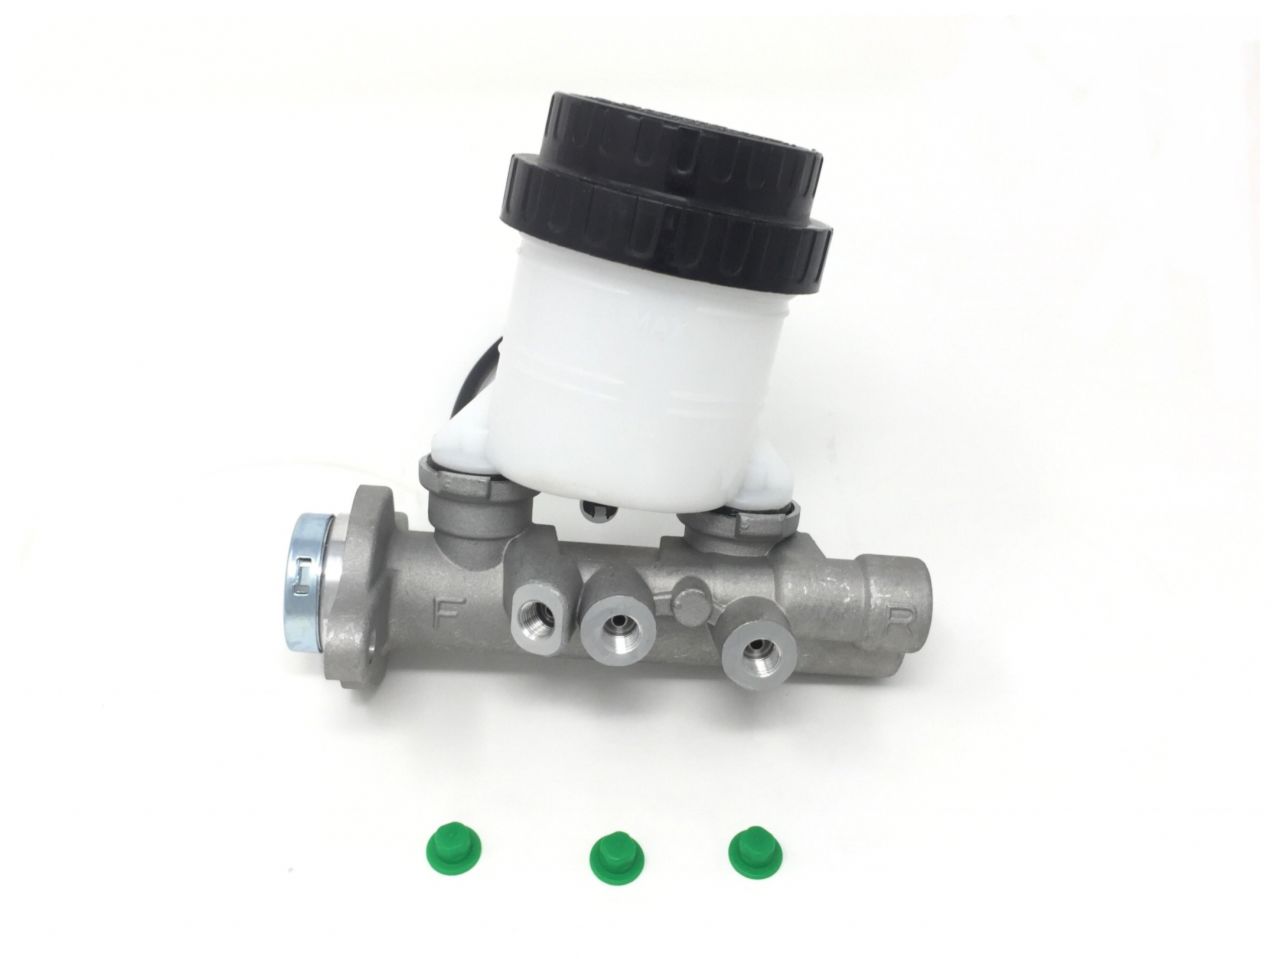 Nissan Z32 300ZX Brake Master Cylinder Upgrade for 240SX Non ABS